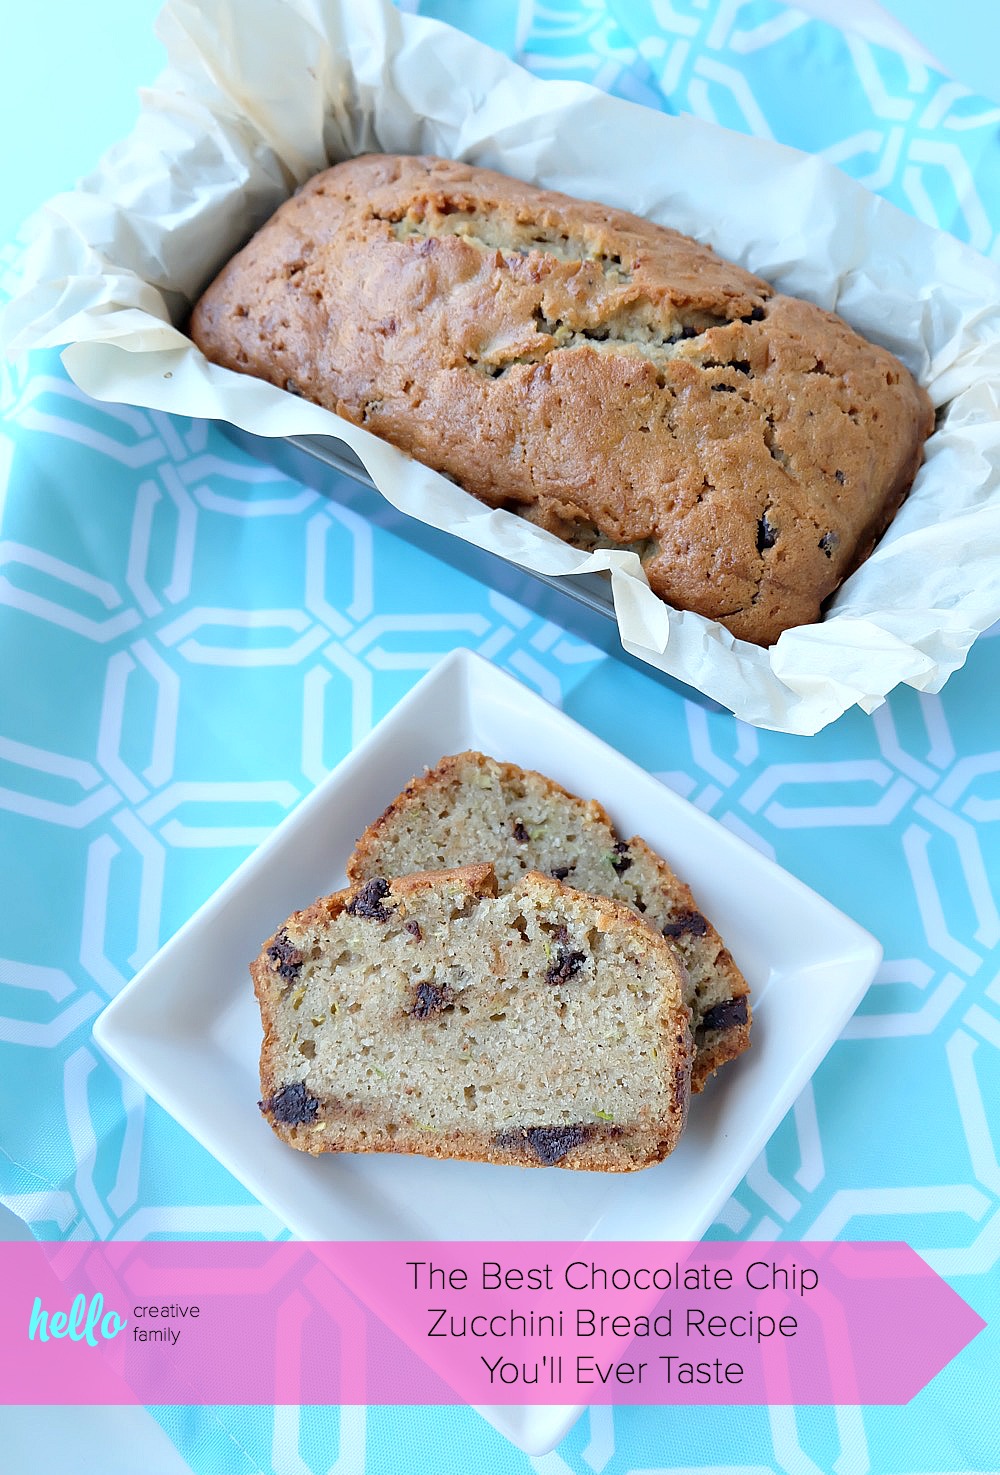 We're not exaggerating when we say that this is the BEST Chocolate Chip Zucchini Bread Recipe you'll ever taste! Give it a try and tell us if you agree! This family friendly recipe is one that we've been baking for years and we know that your family will love it just as much as ours does! #Baking #Recipe #Zucchini #Bread